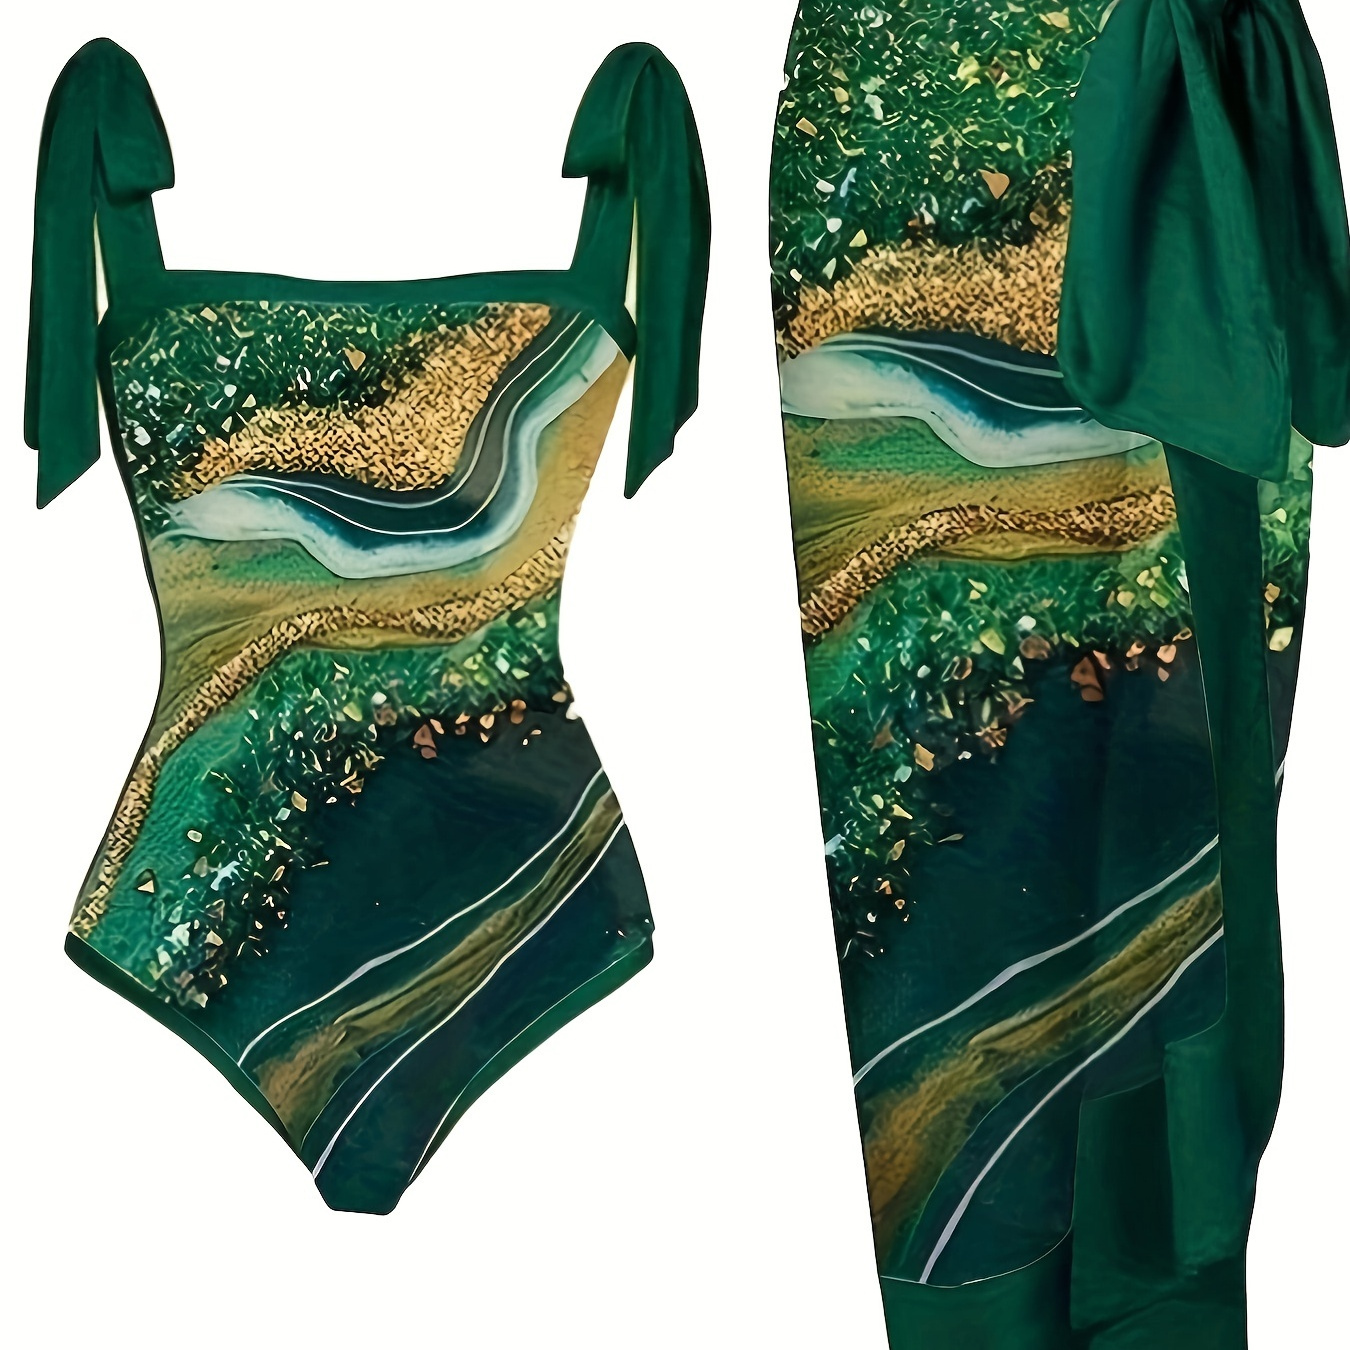 

Plus Size One-piece Swimsuit With Beach Skirt, Conservative Style, Green Abstract Marble Print, Summer Swimwear, Poolside Outfit, Vacation Essential